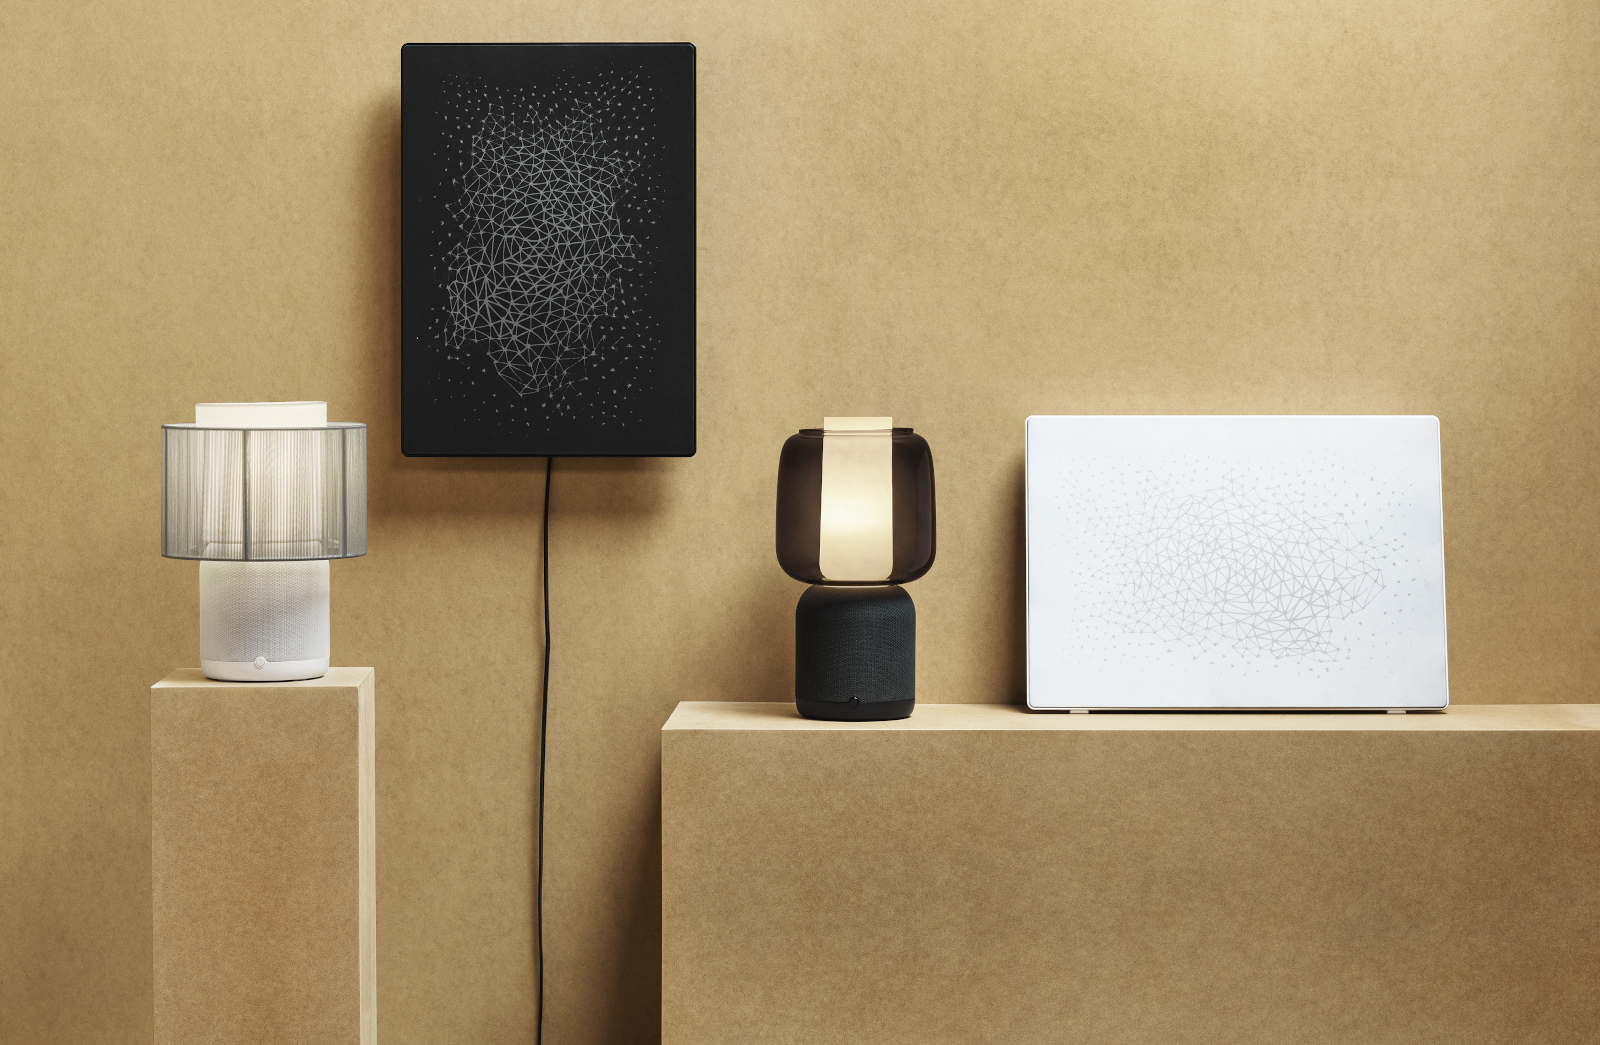 IKEA launches customizable Sonos speaker lamp with swappable shades